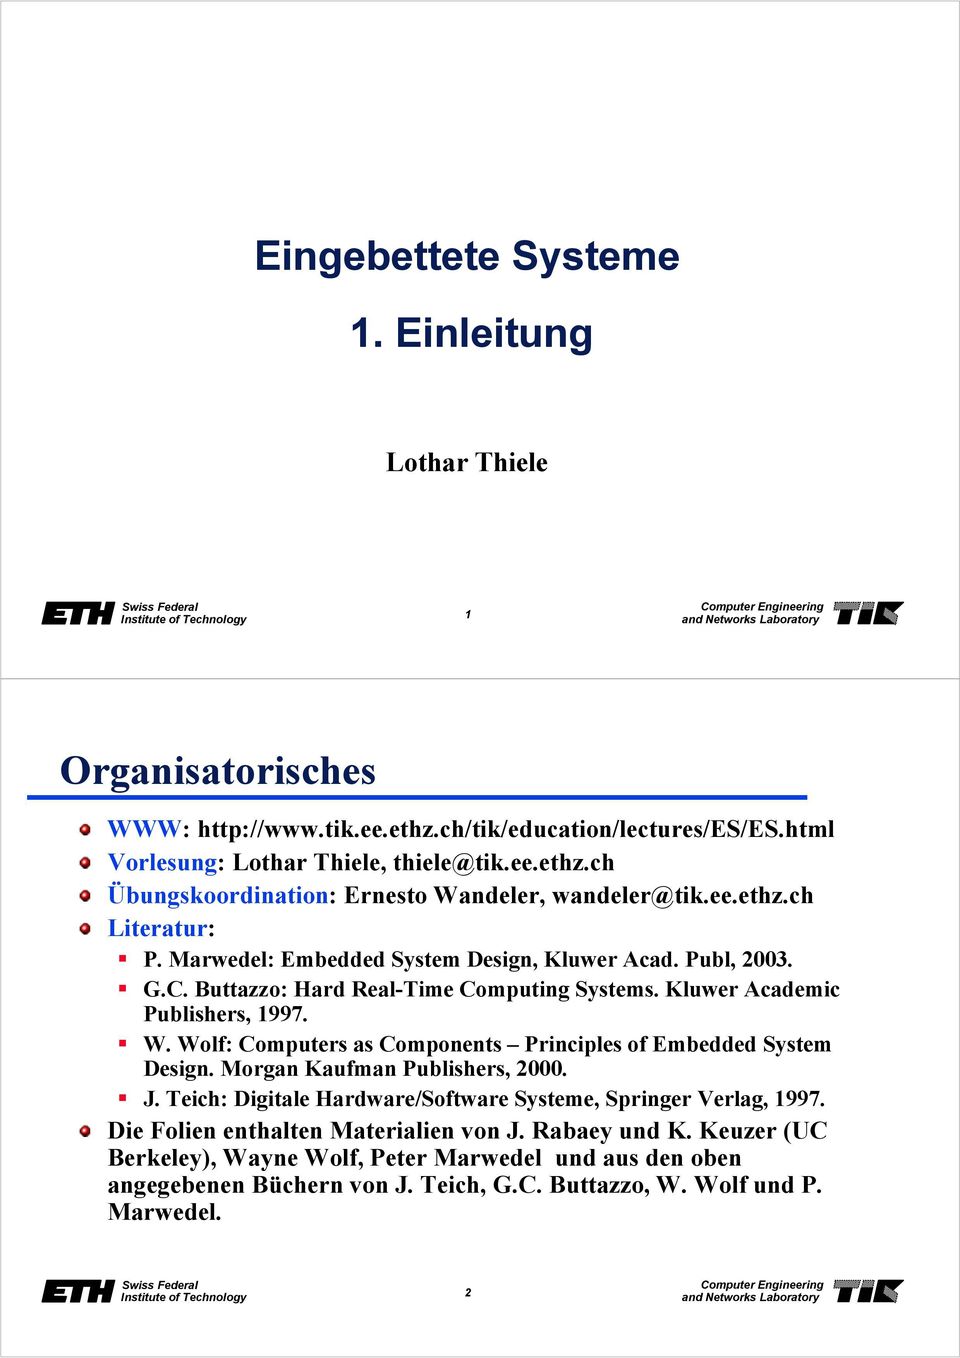 Wolf: Computers as Components Principles of Embedded System Design. Morgan Kaufman Publishers, 2000. J. Teich: Digitale Hardware/Software Systeme, Springer Verlag, 1997.